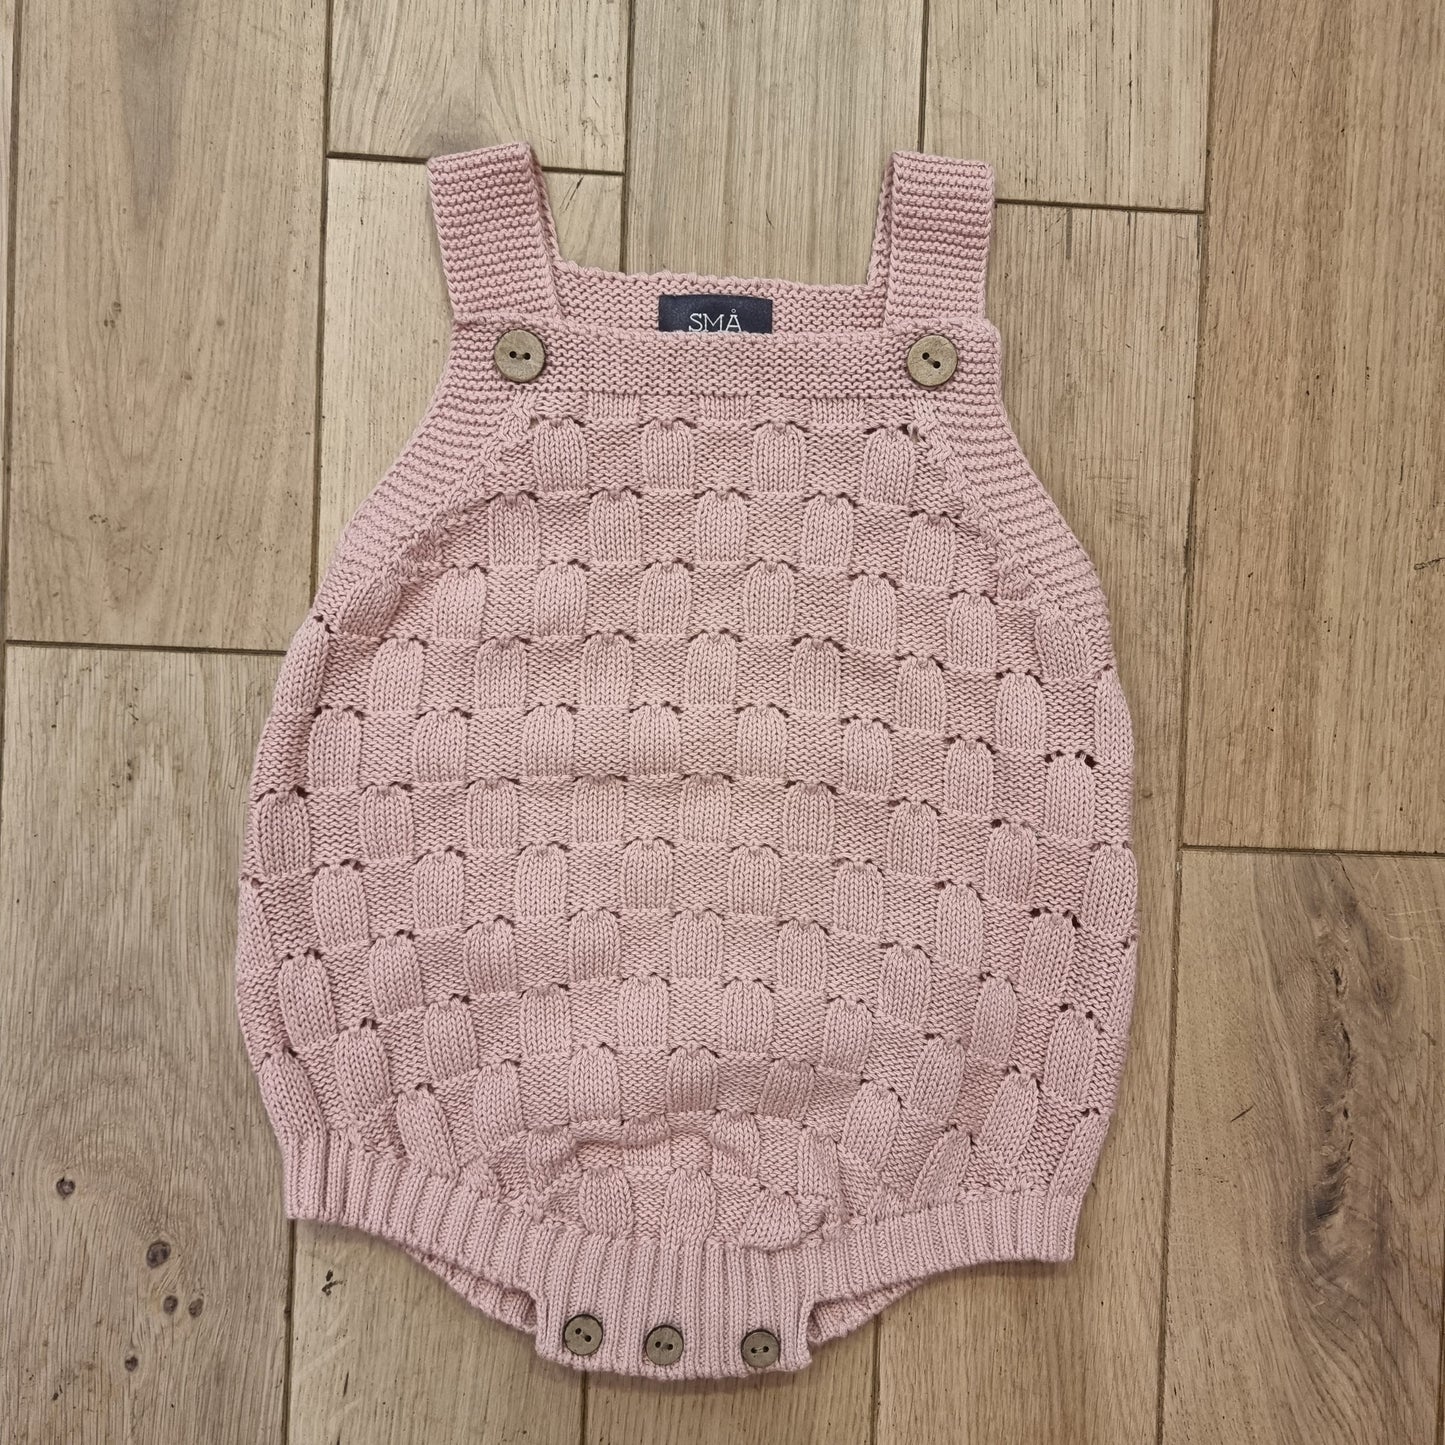 CHERRY knitted baby romper in cotton